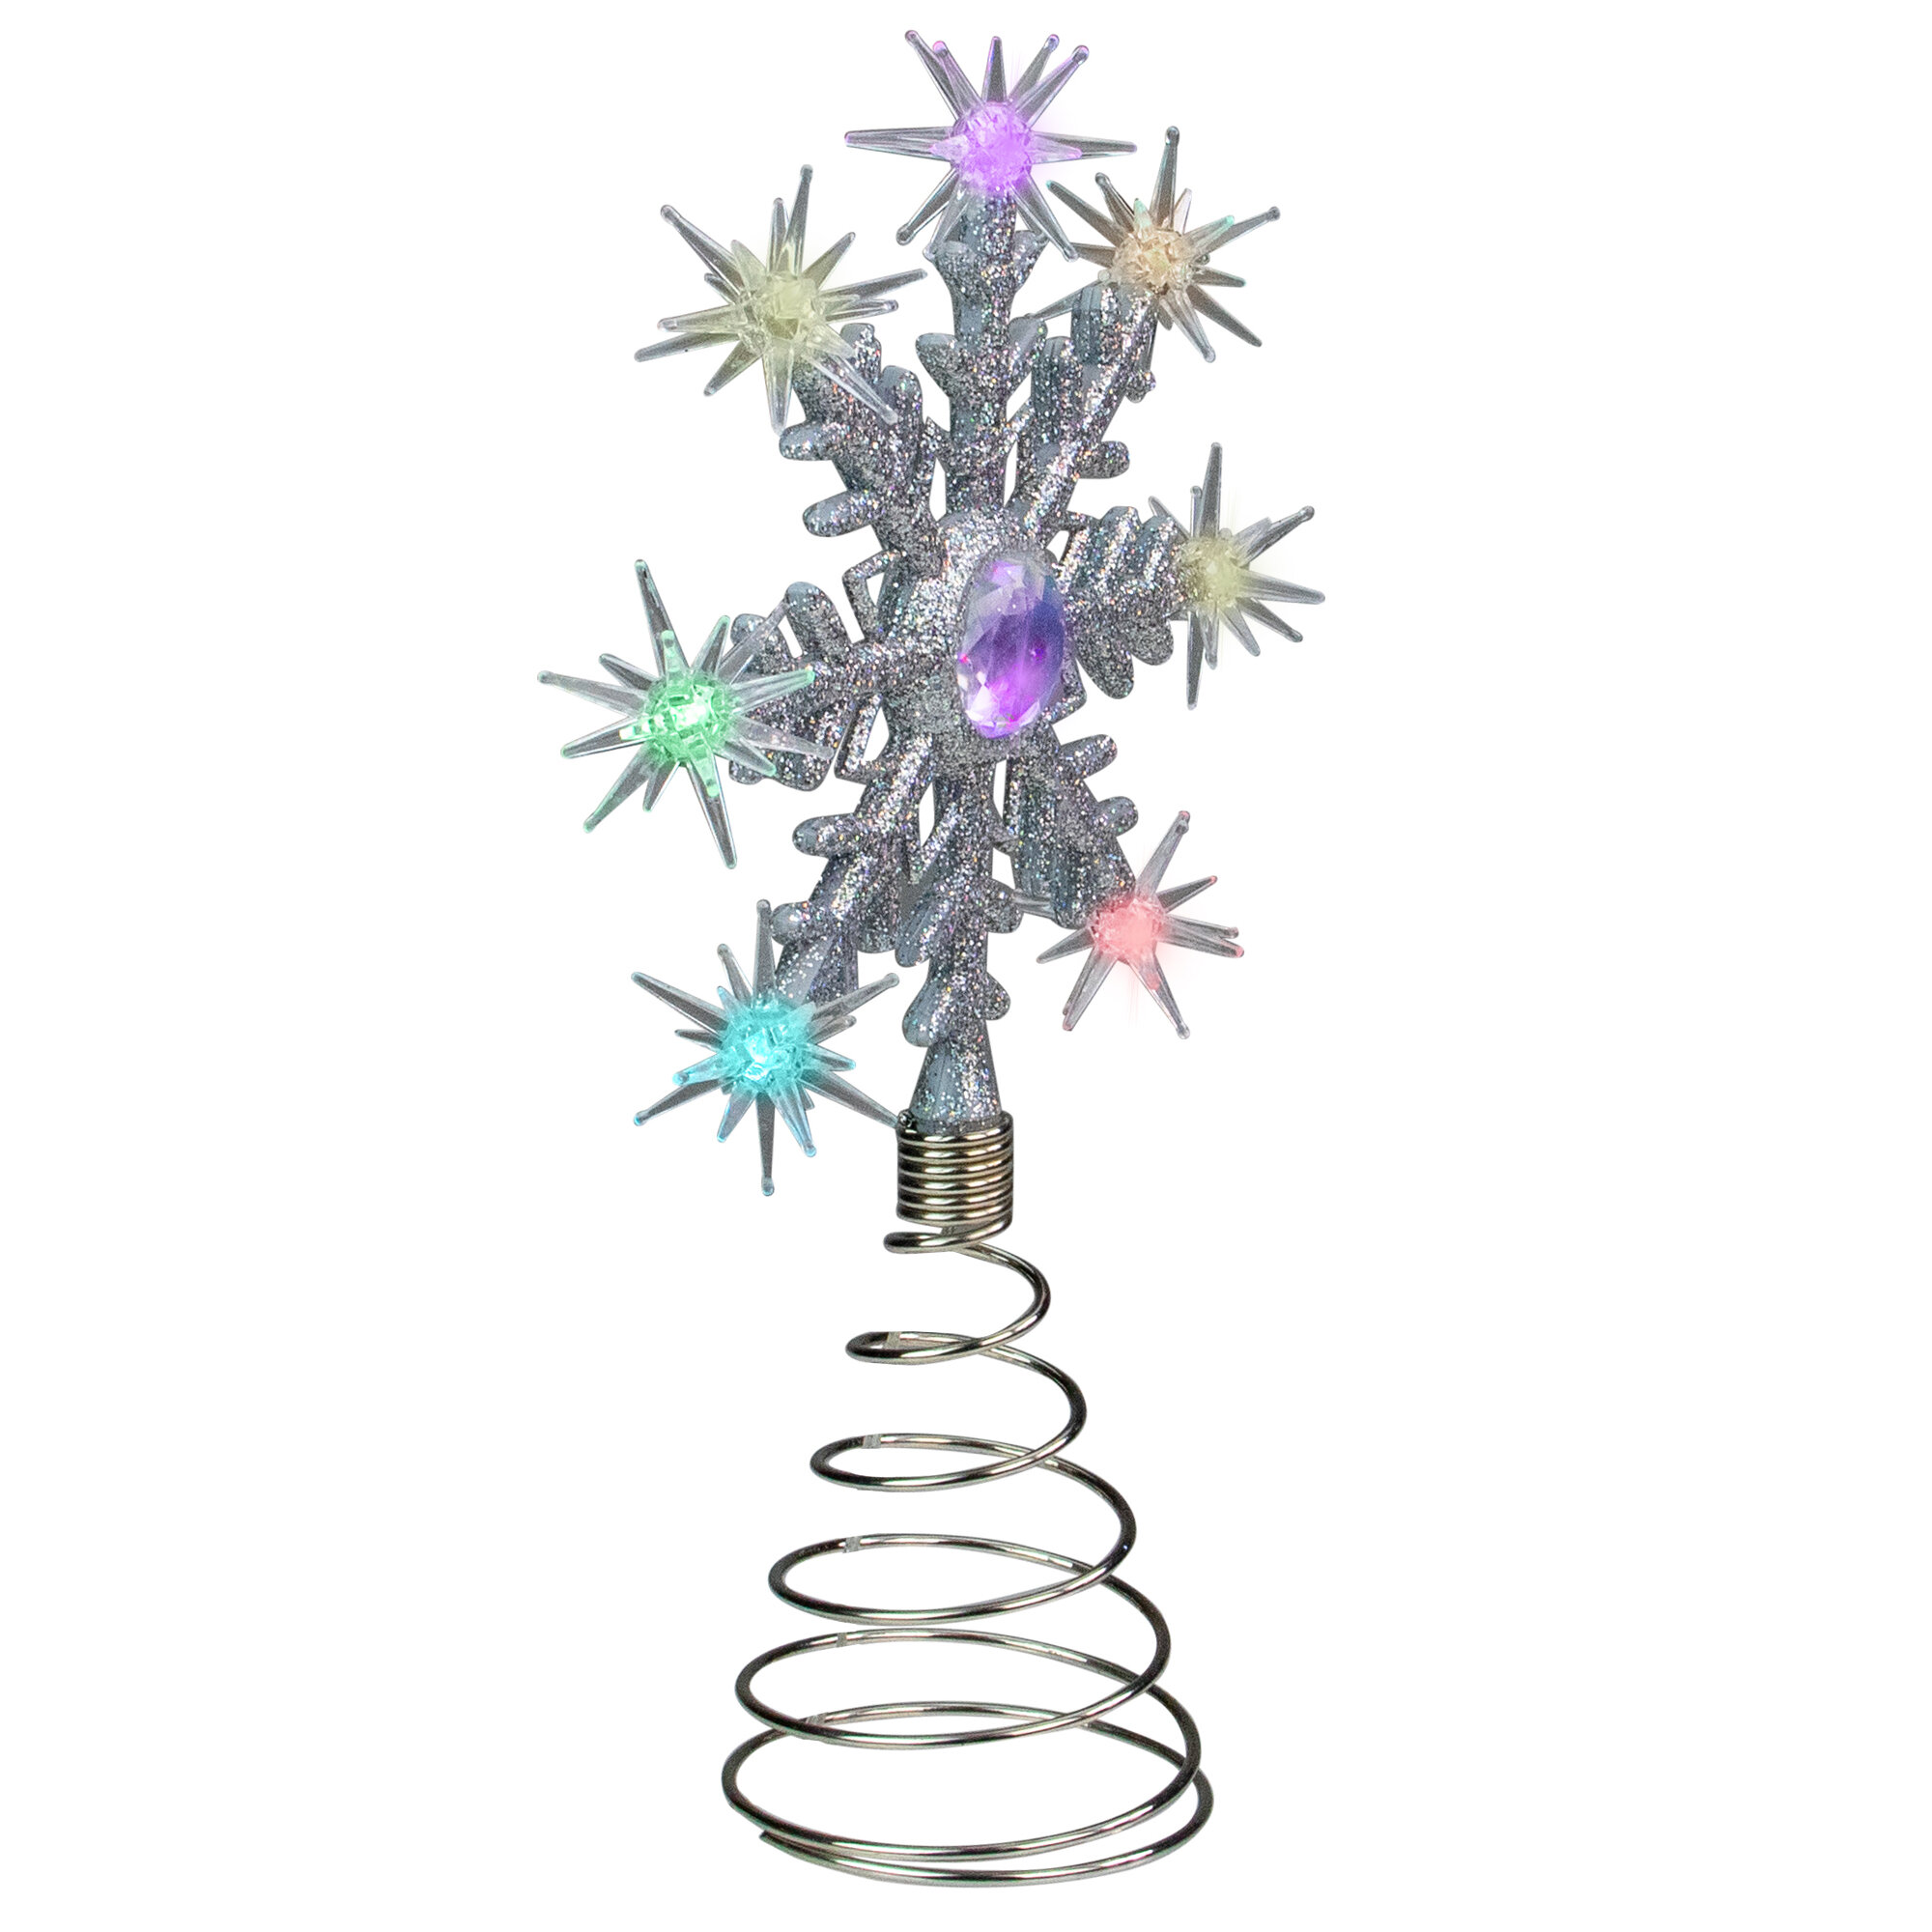 Northlight 14.75 LED Lighted Clip-On Snowflake Christmas Tree Topper,  White Lights